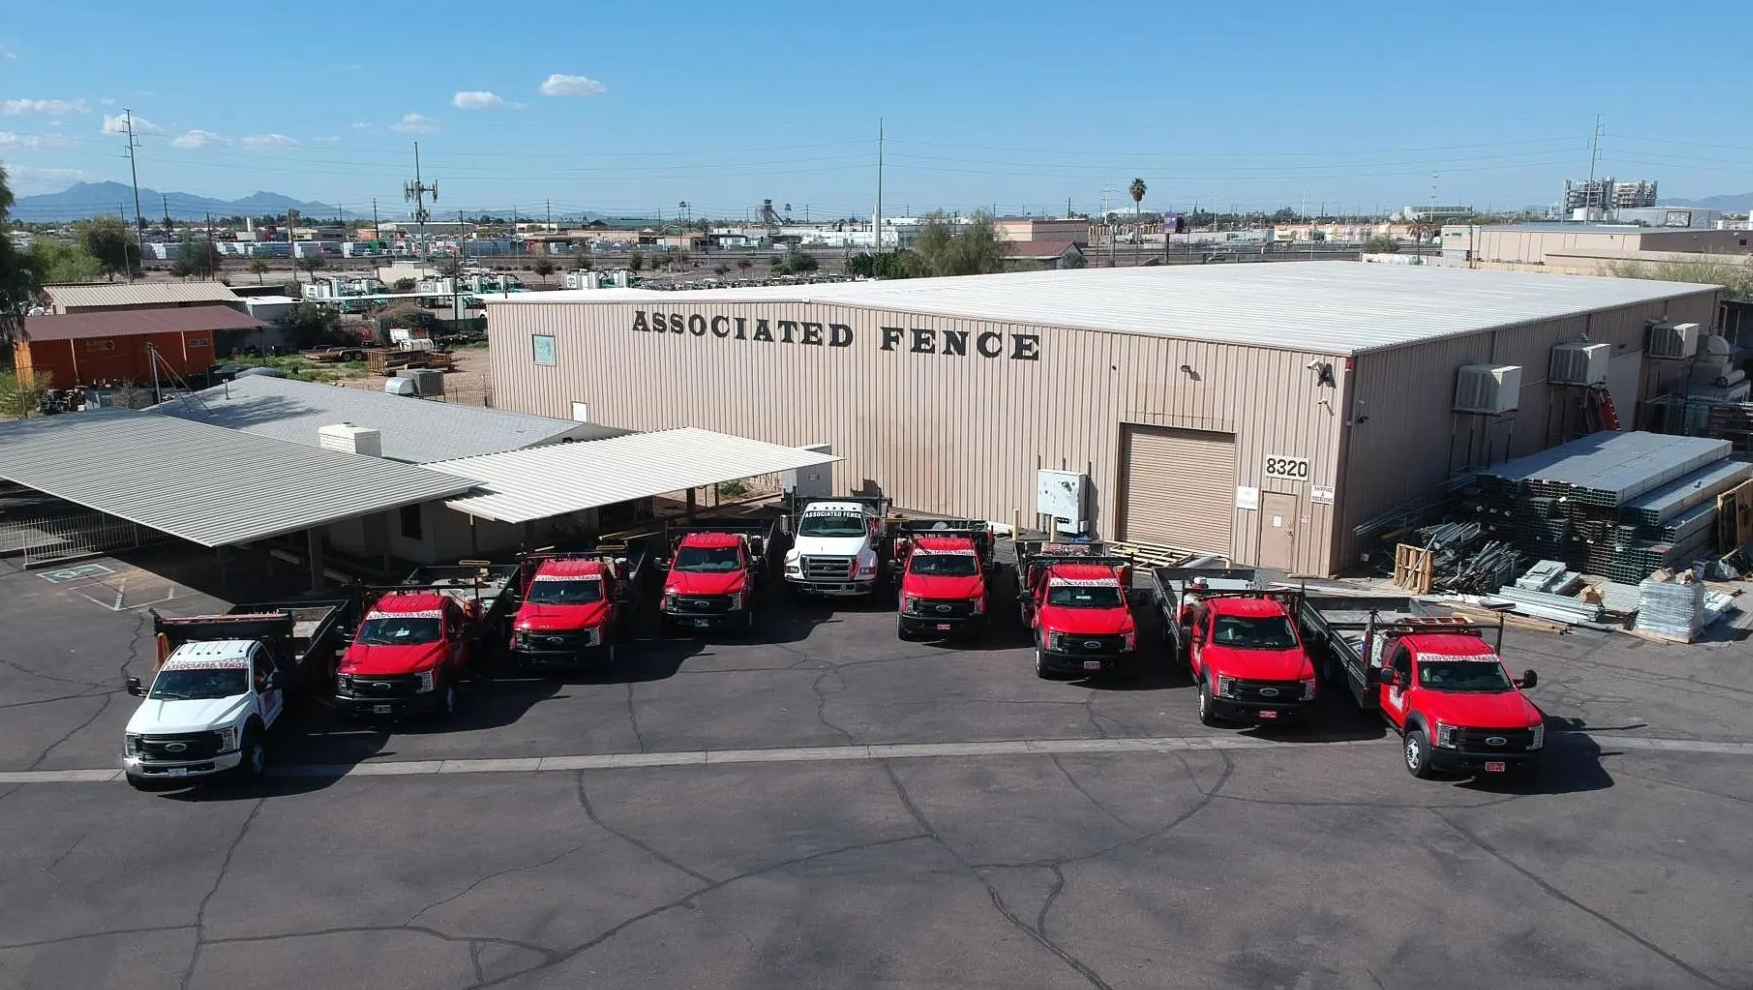 Our Facility - Residential and Commercial Fences in Glendale, AZ